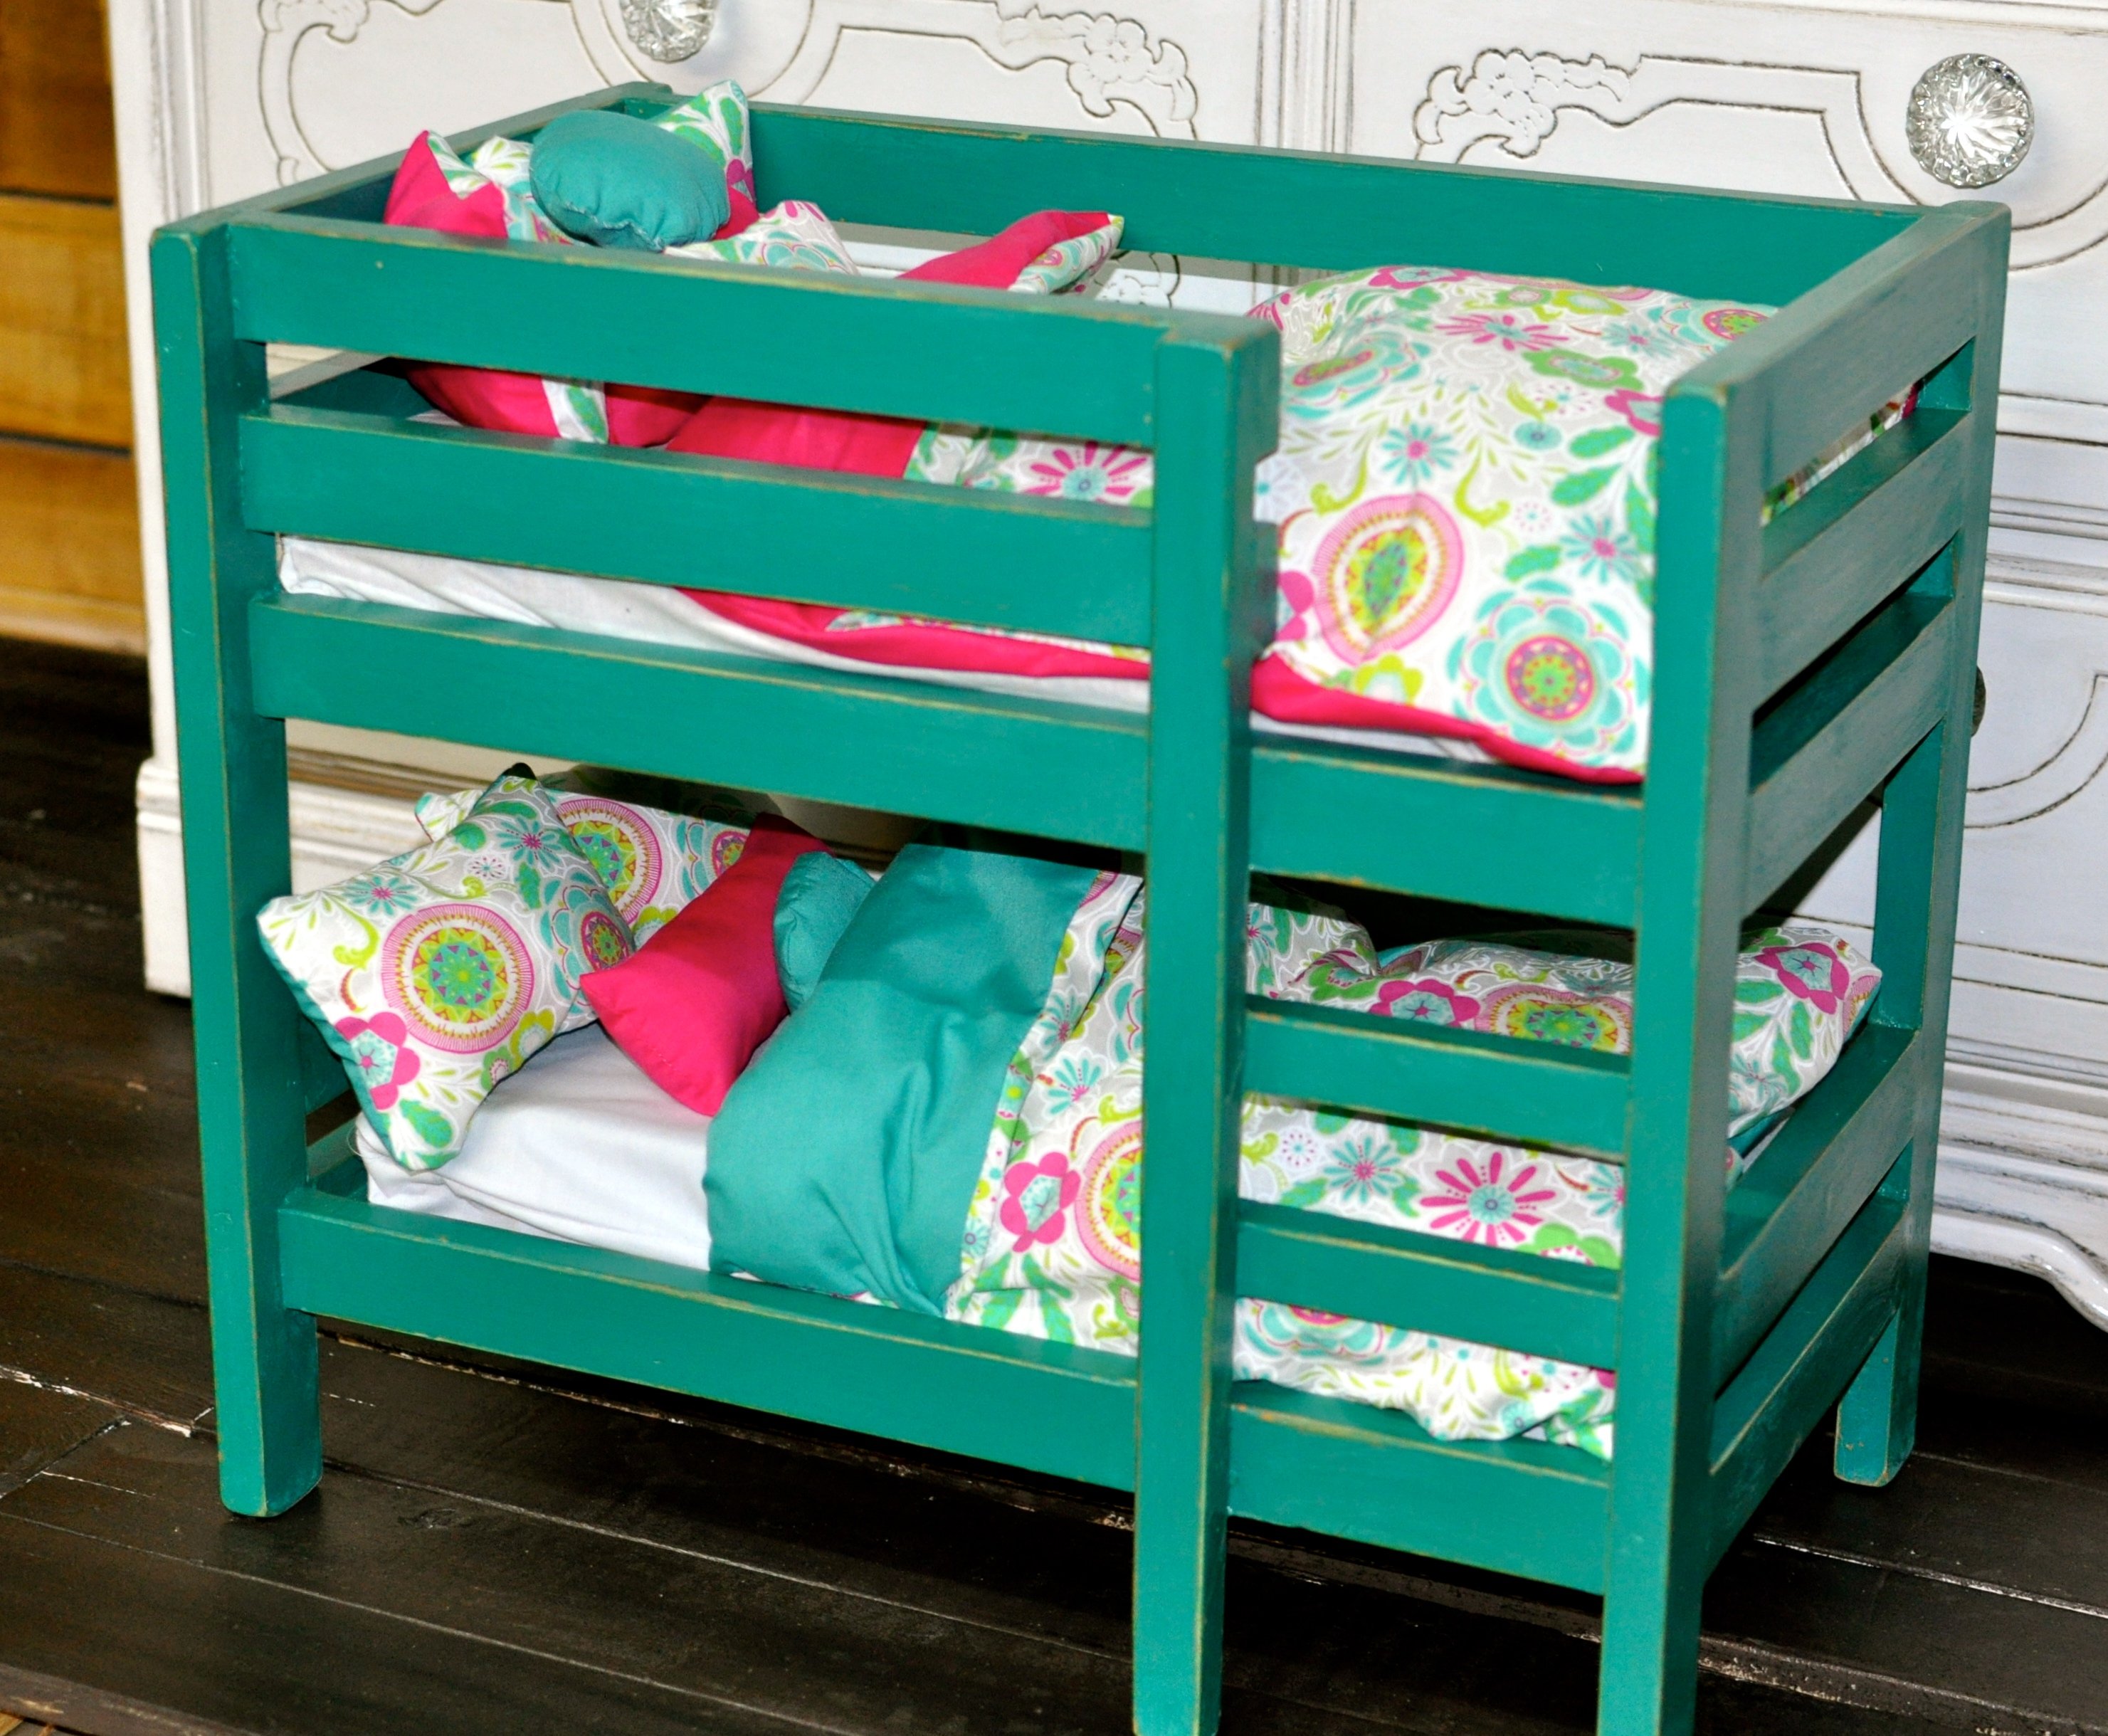 American Girl Doll Bunk Beds Ana White, How To Make A 18 Inch Doll Bunk Bed